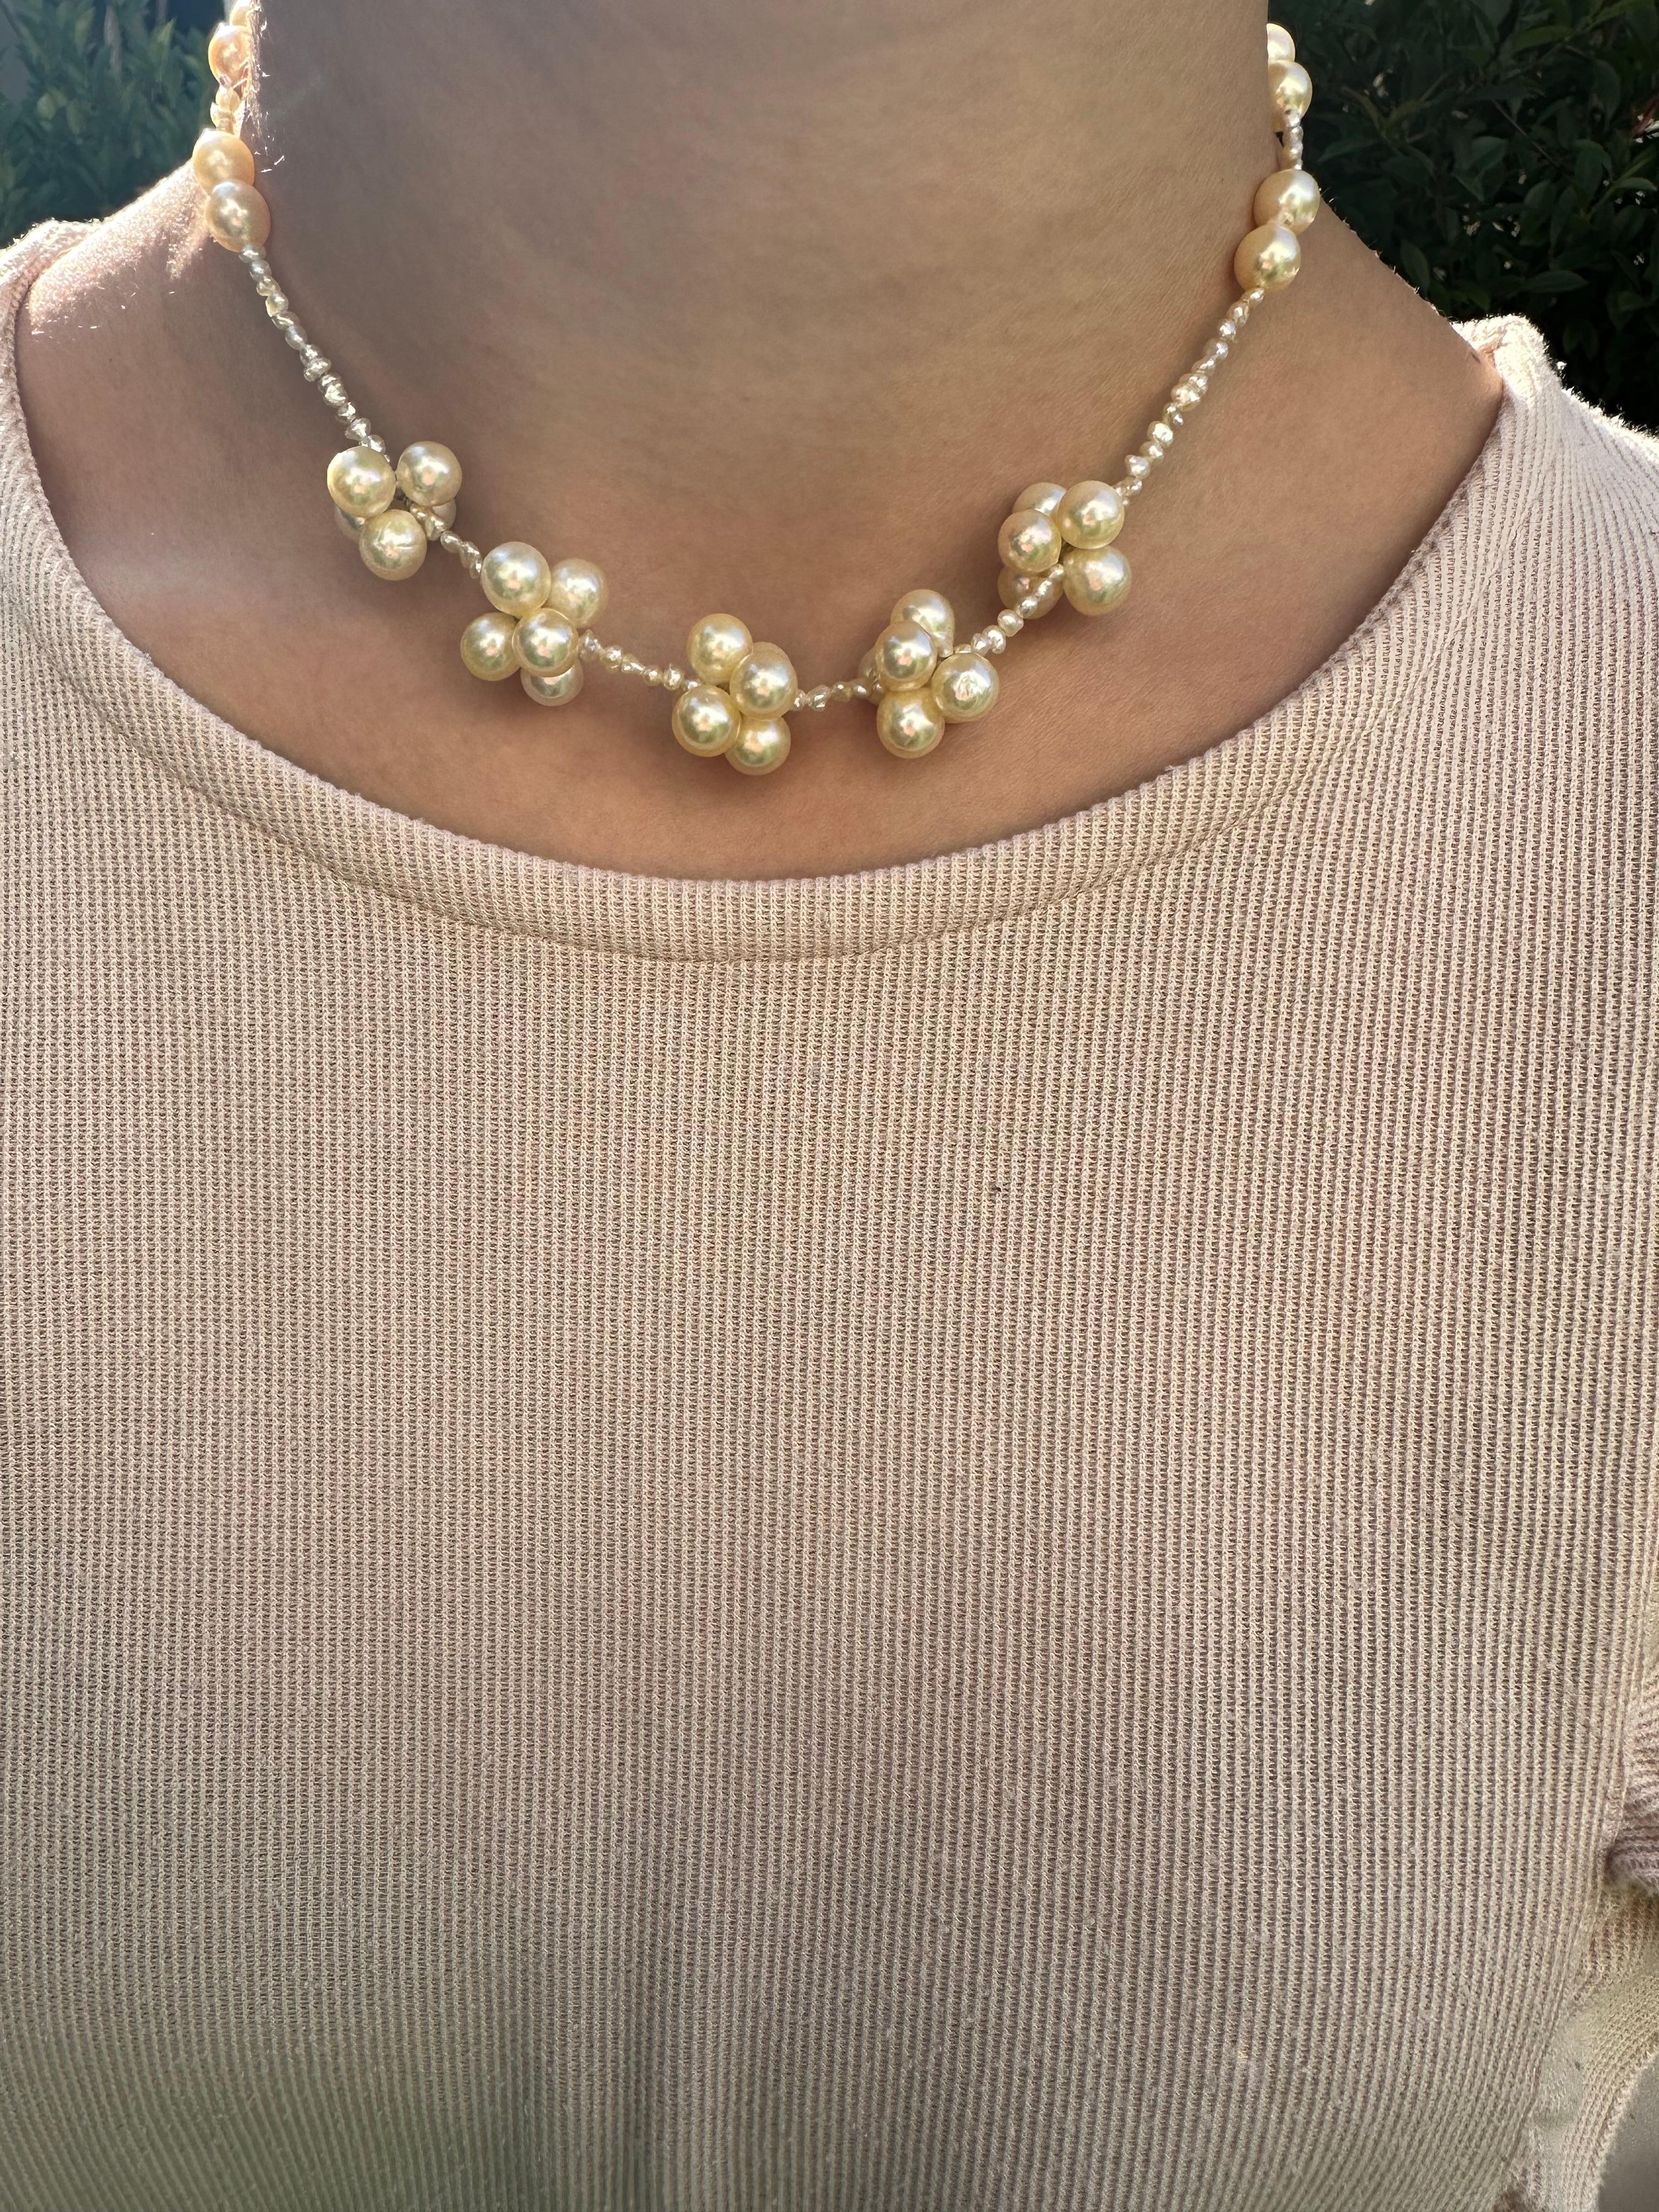 japan pearl necklace